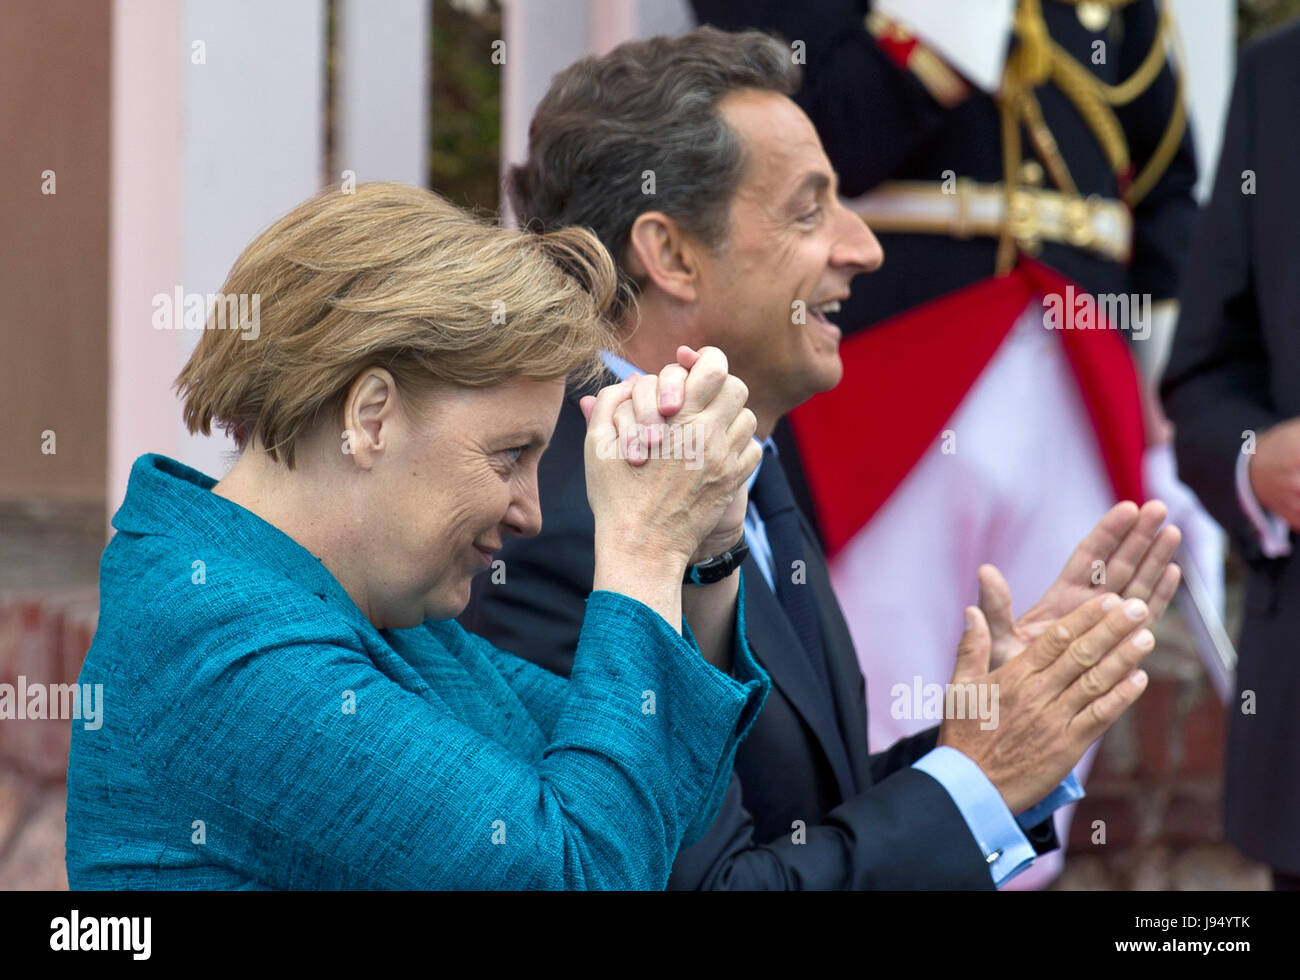 French President Nicolas Sarkozy and German Chancellor Angela Merkel are pictured together at the beginning of the G8 summit in Deauville, Germany, 26 May 2011. The G8 summit takes place between 26 and 27 May 2011. Photo: PEER GRIMM | usage worldwide Stock Photo